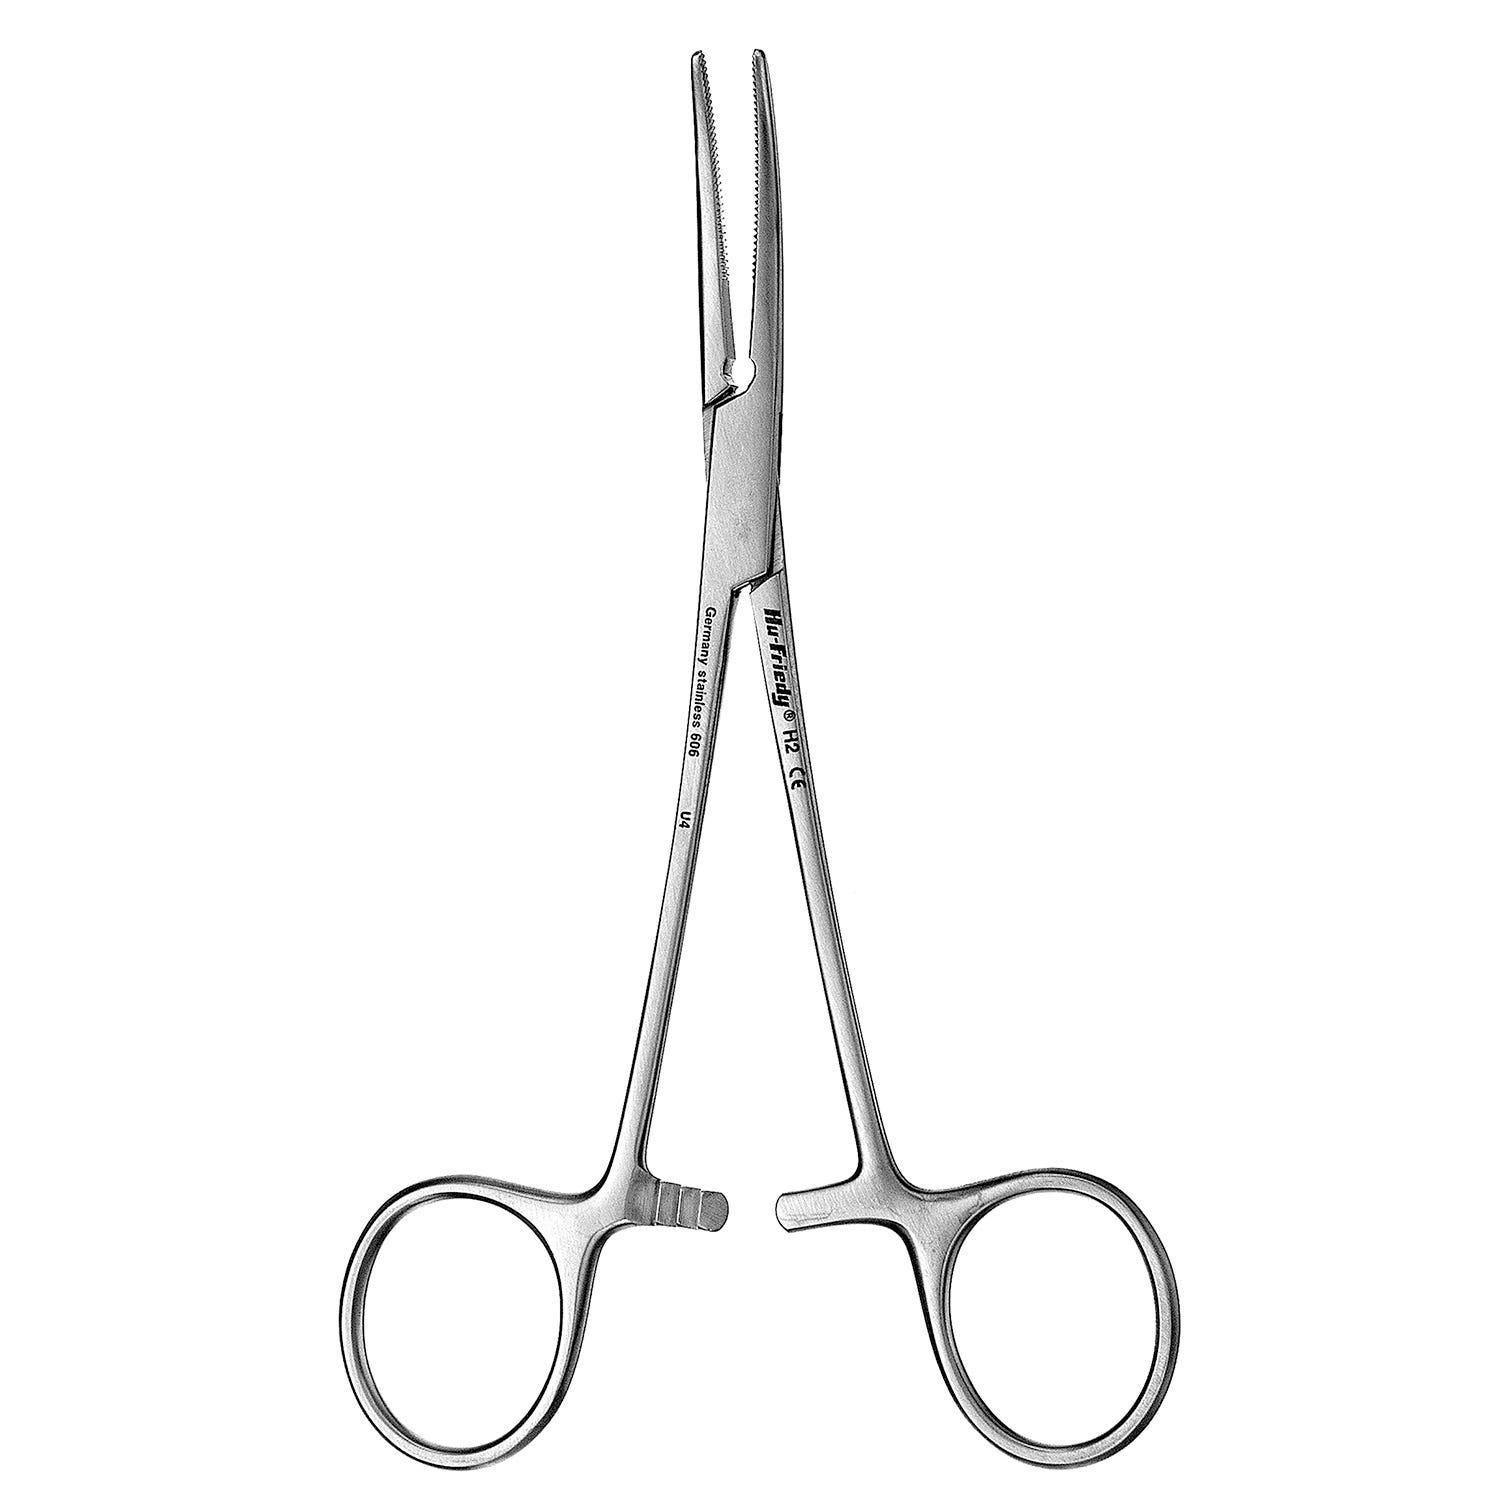 Forcep Kelly Provident #2 Curved 5 1/2" 14cm